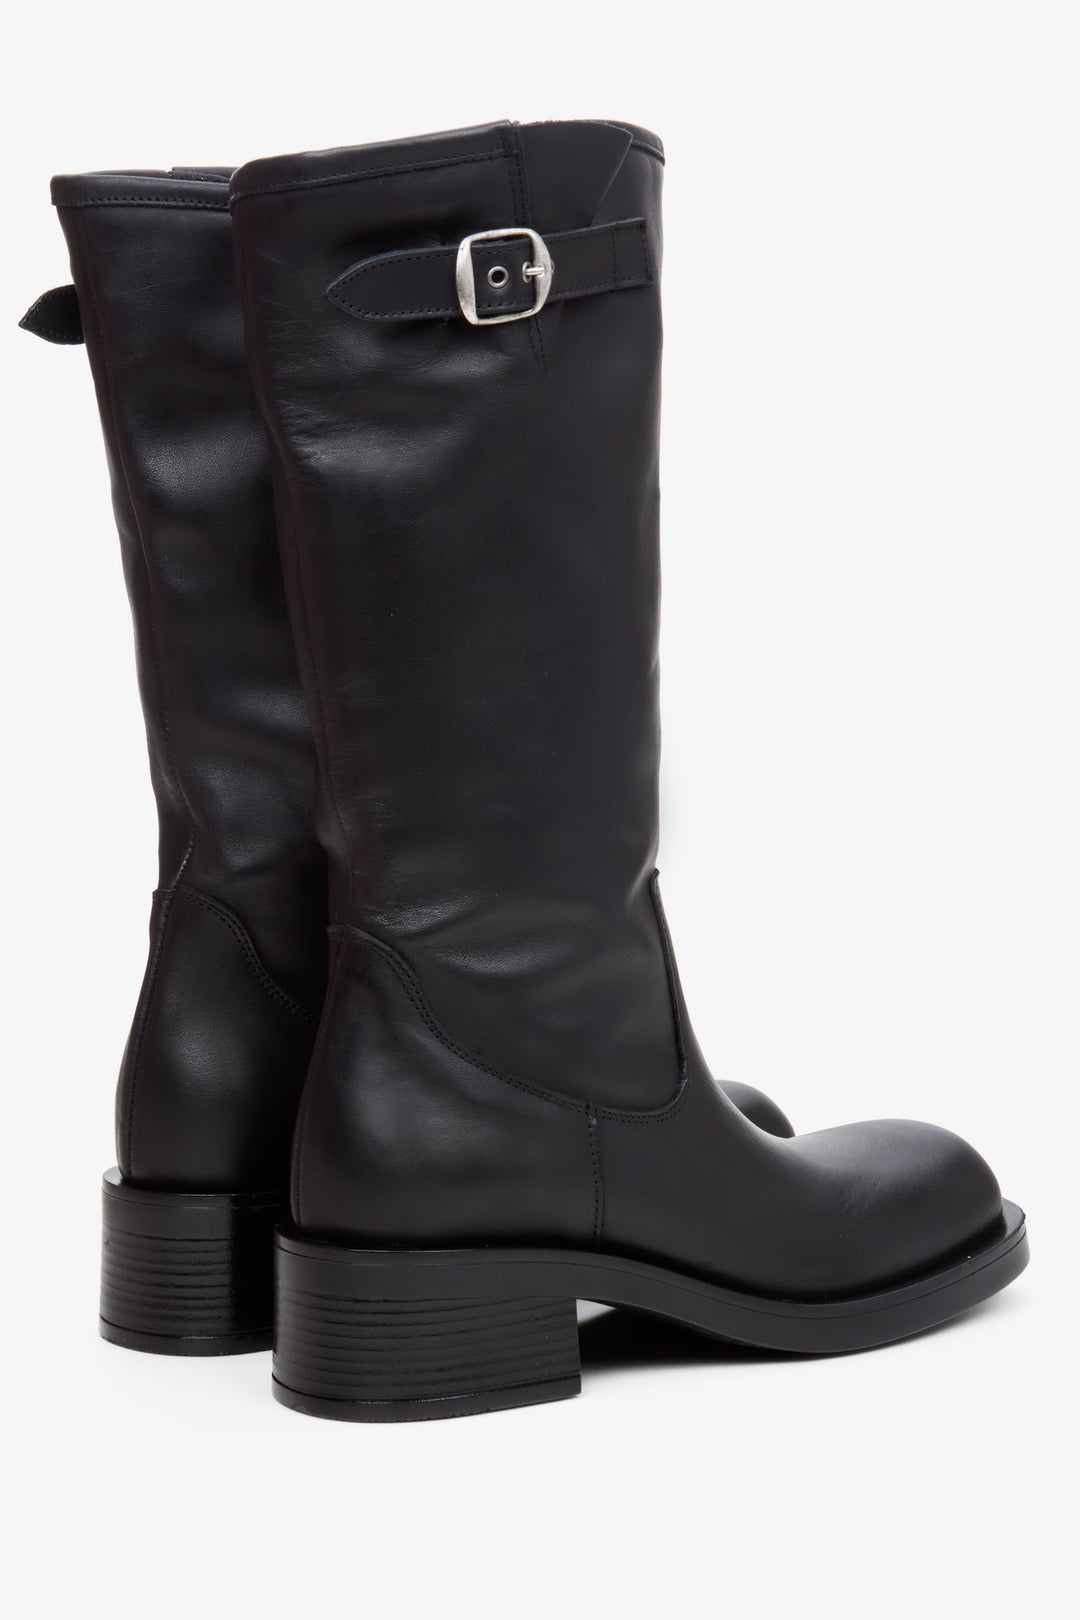 Black high women's boots made of genuien leather by Estro.